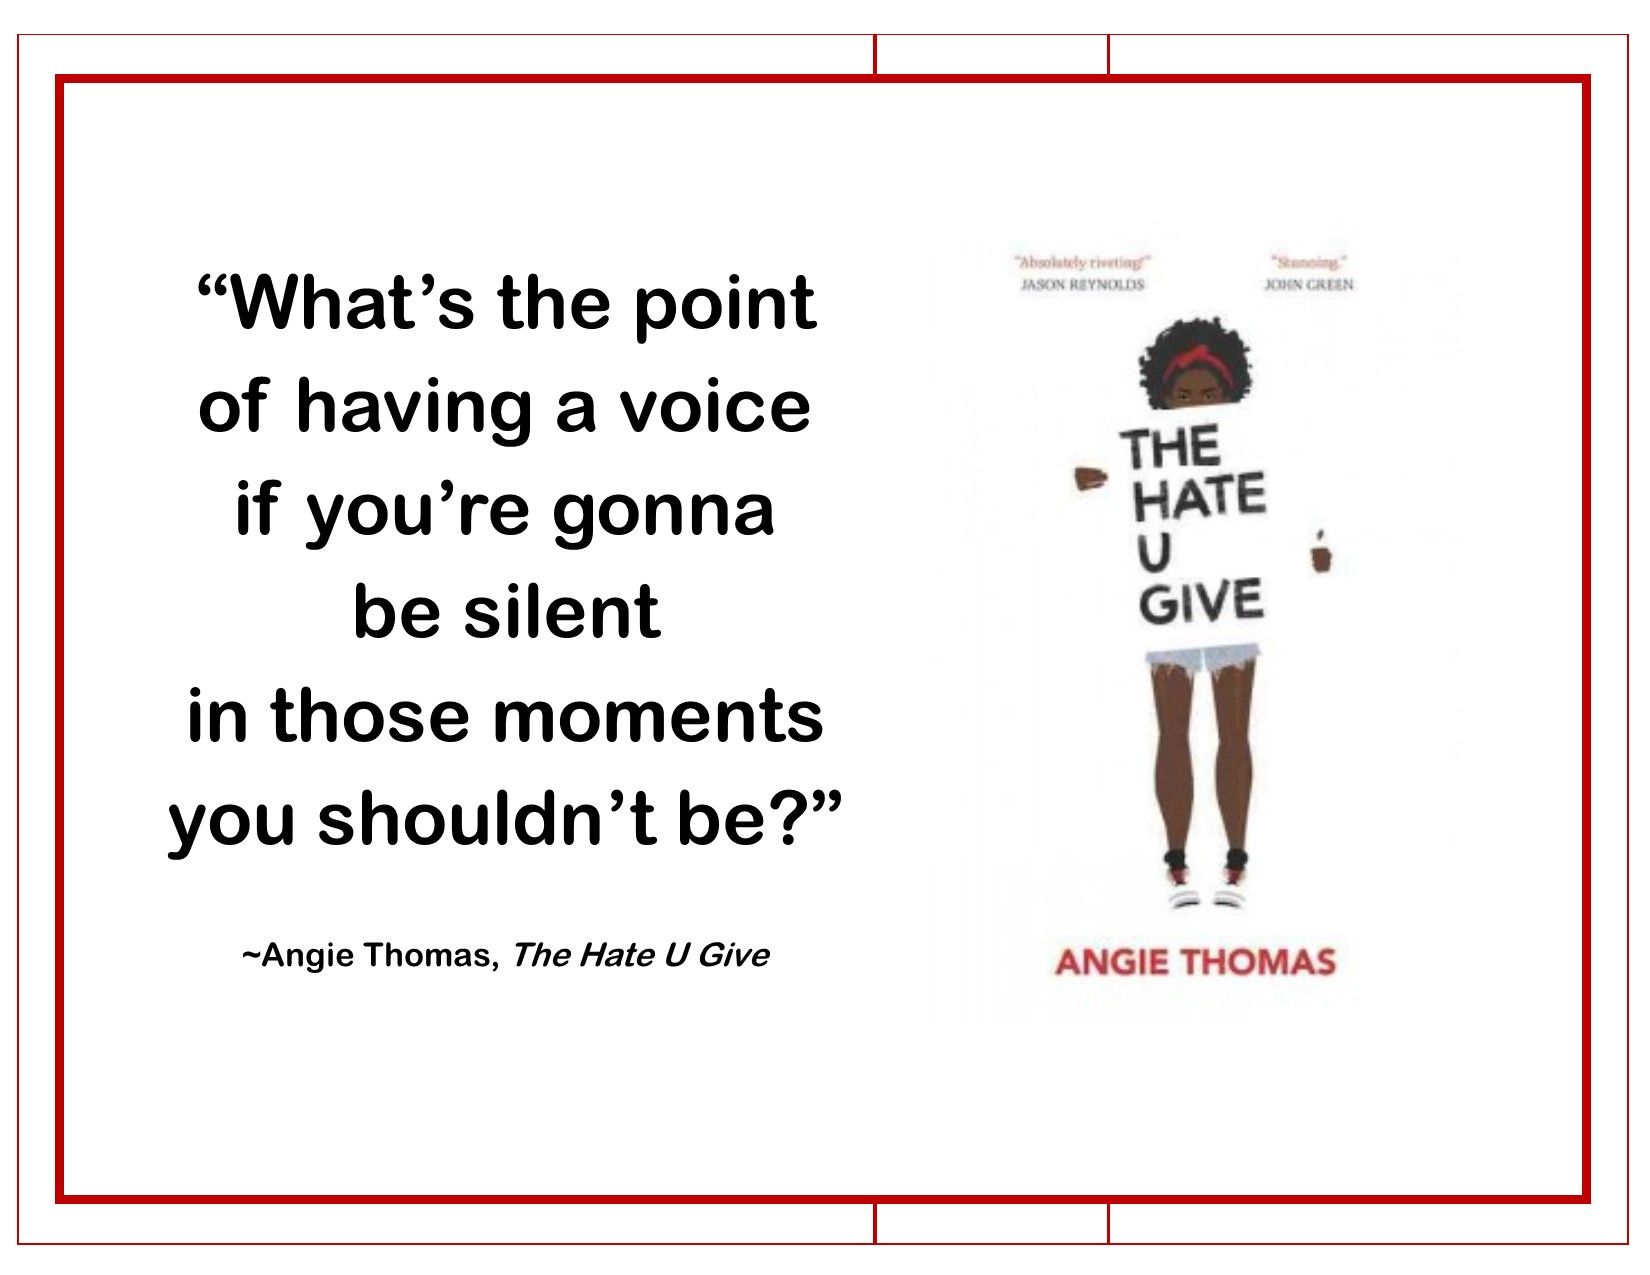 thesis of the hate you give